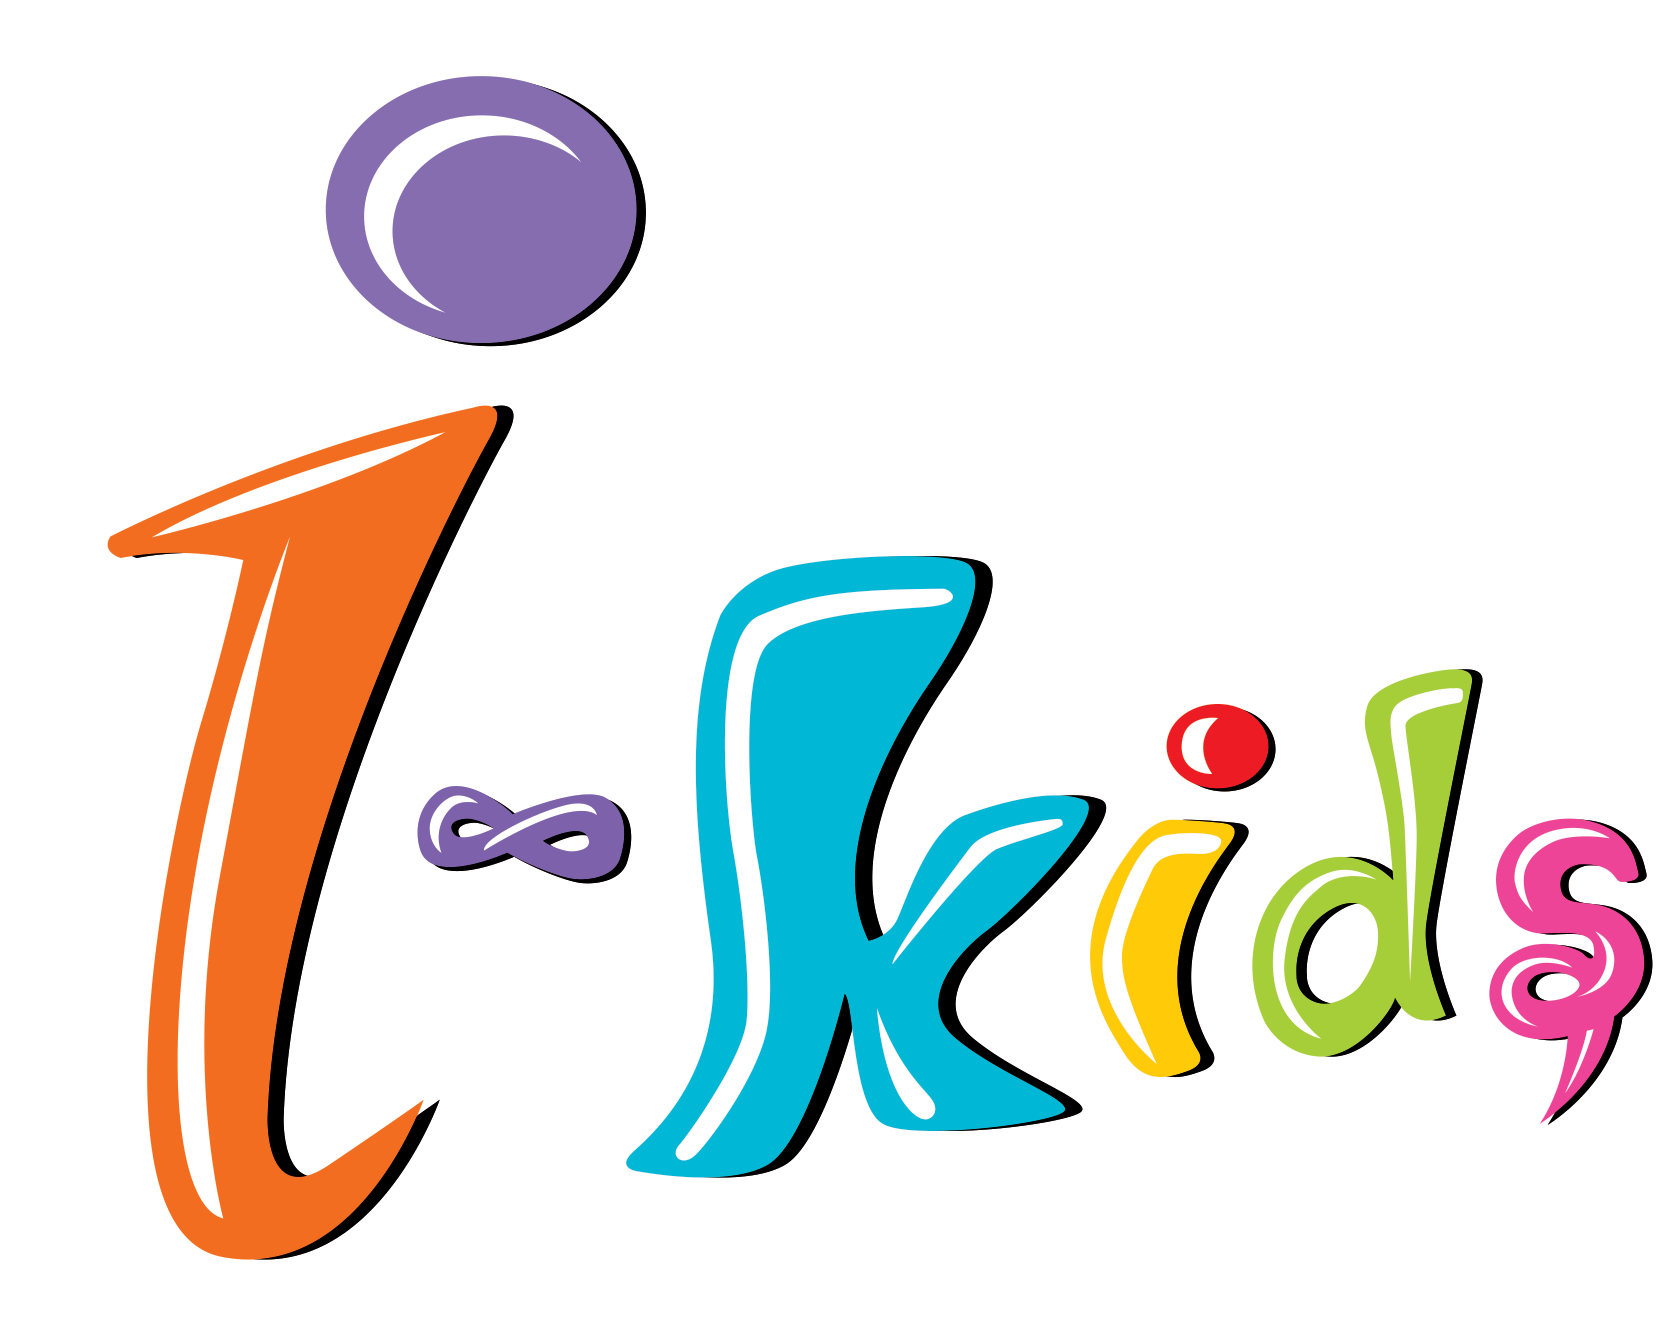 About i-kids